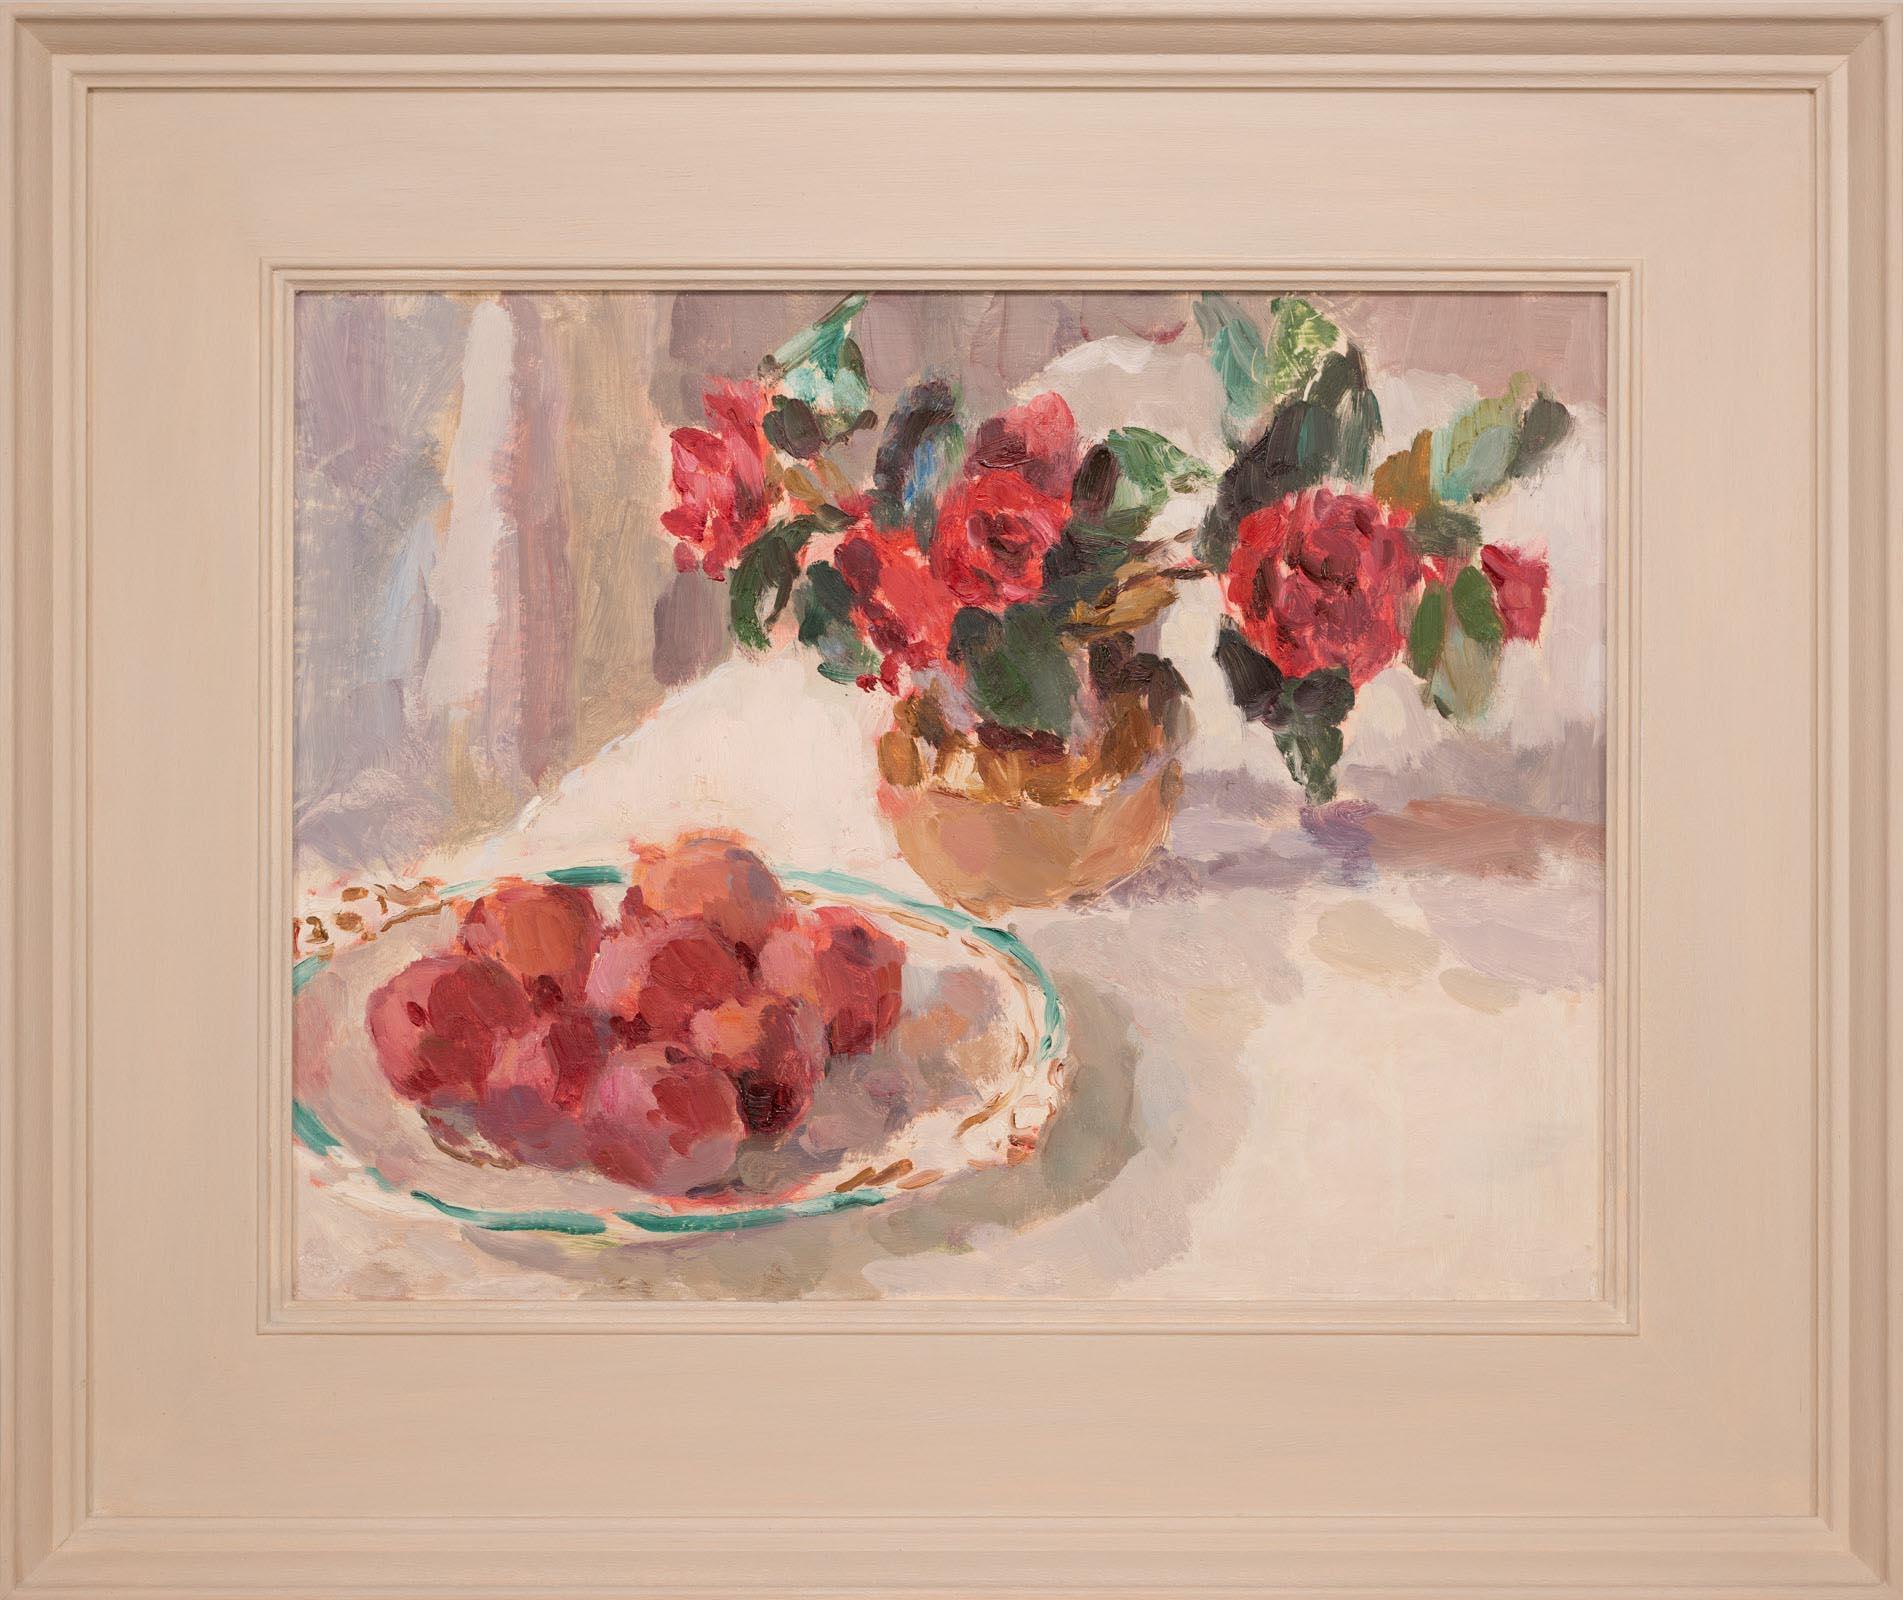 Camellias and a Dish of Plums, Still Life Painting, Impressionist Art, FloralArt - Brown Abstract Painting by Lynne Cartlidge